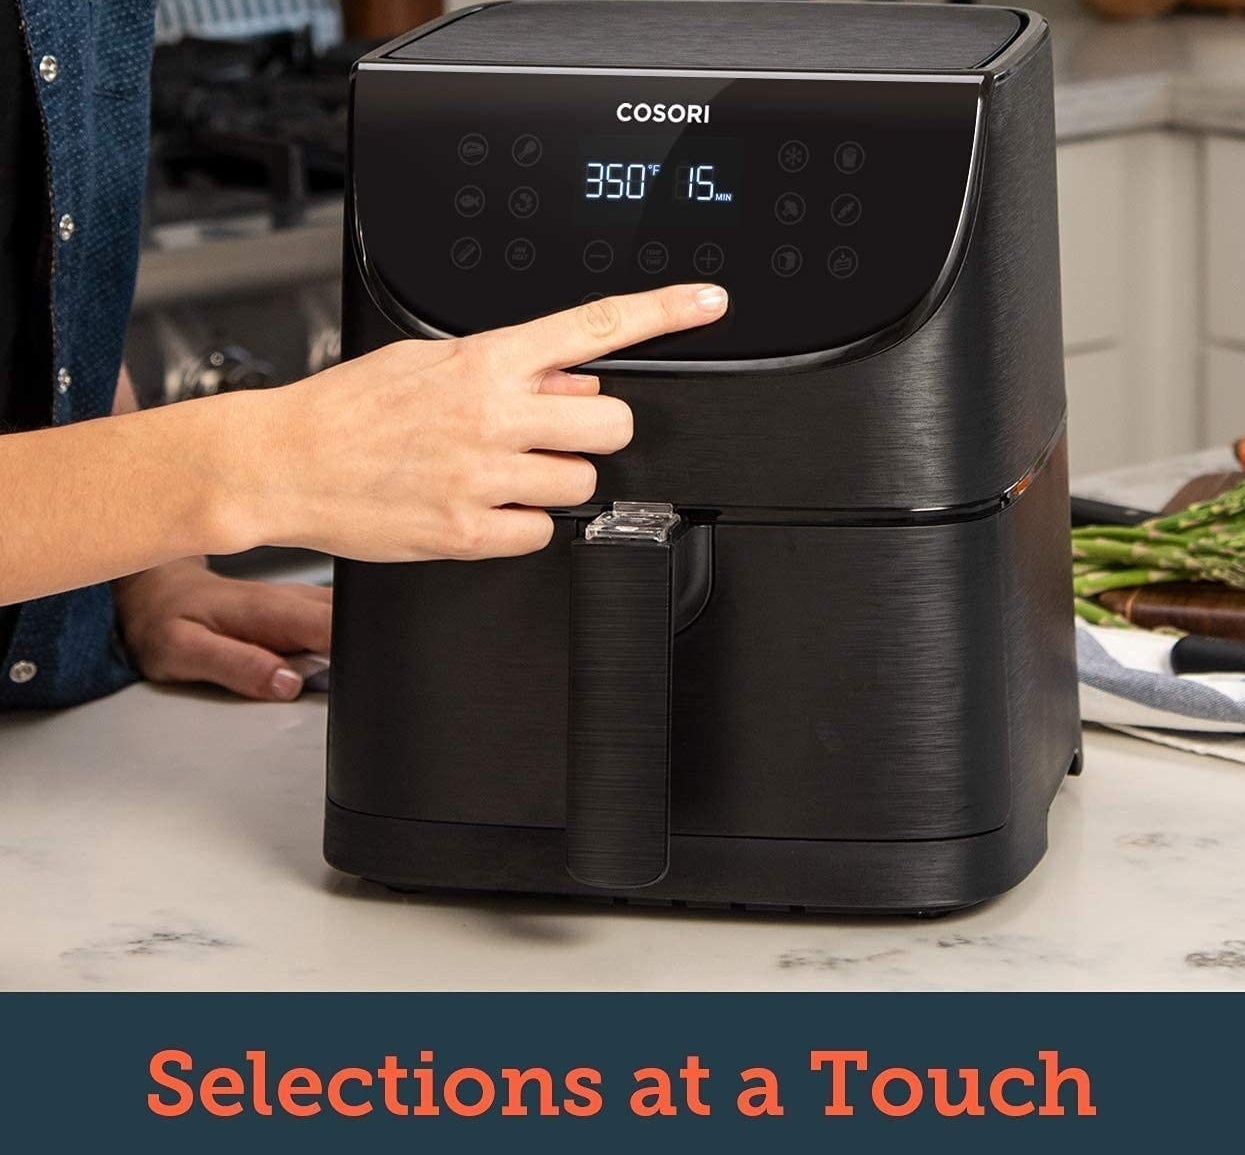 A person pressing a button on the face of the air fryer